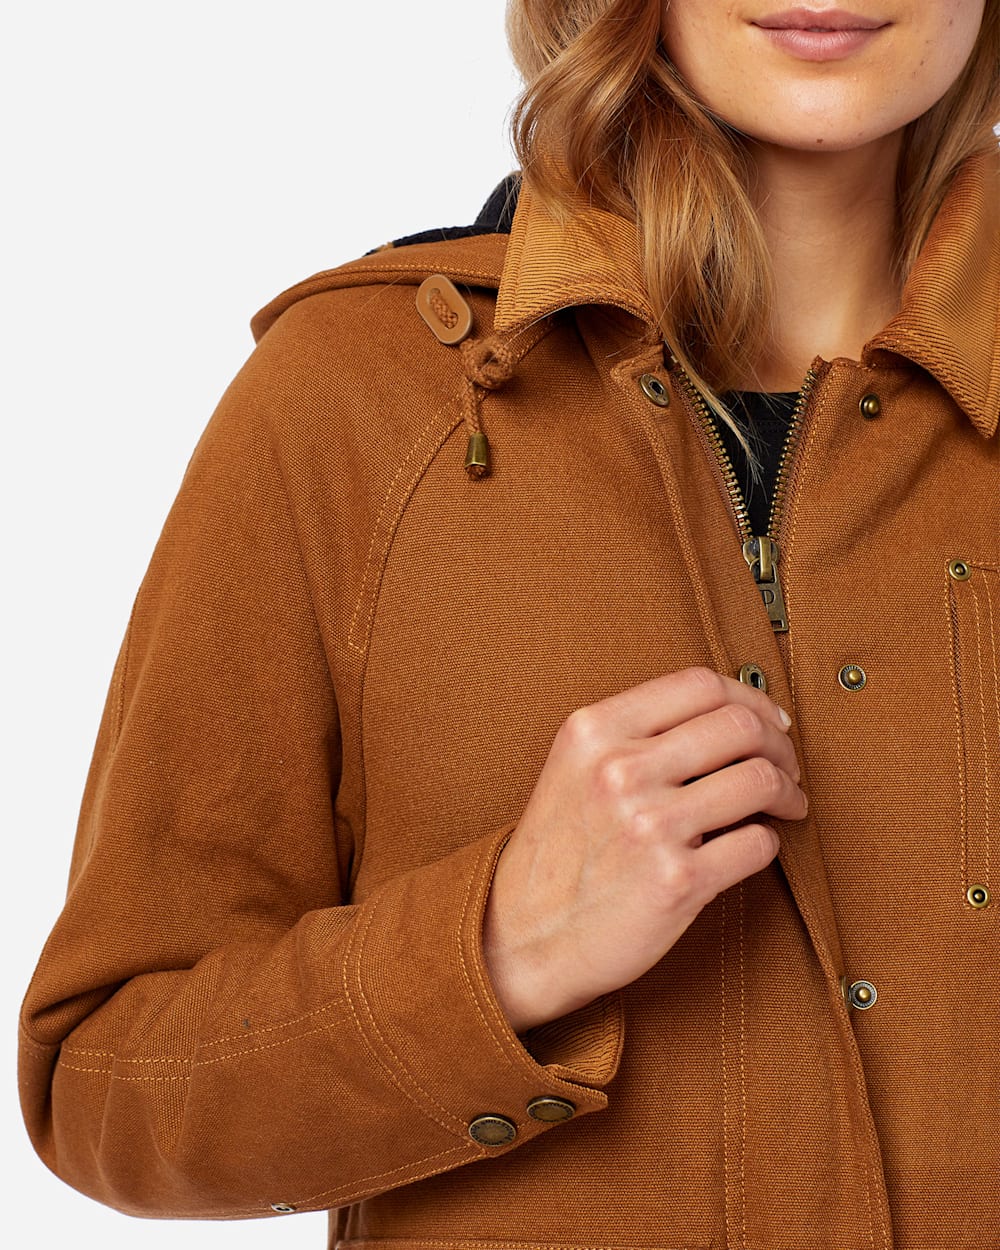 ALTERNATE VIEW OF WOMEN'S ST HELENA SHERPA-LINED COAT IN WHISKEY image number 5